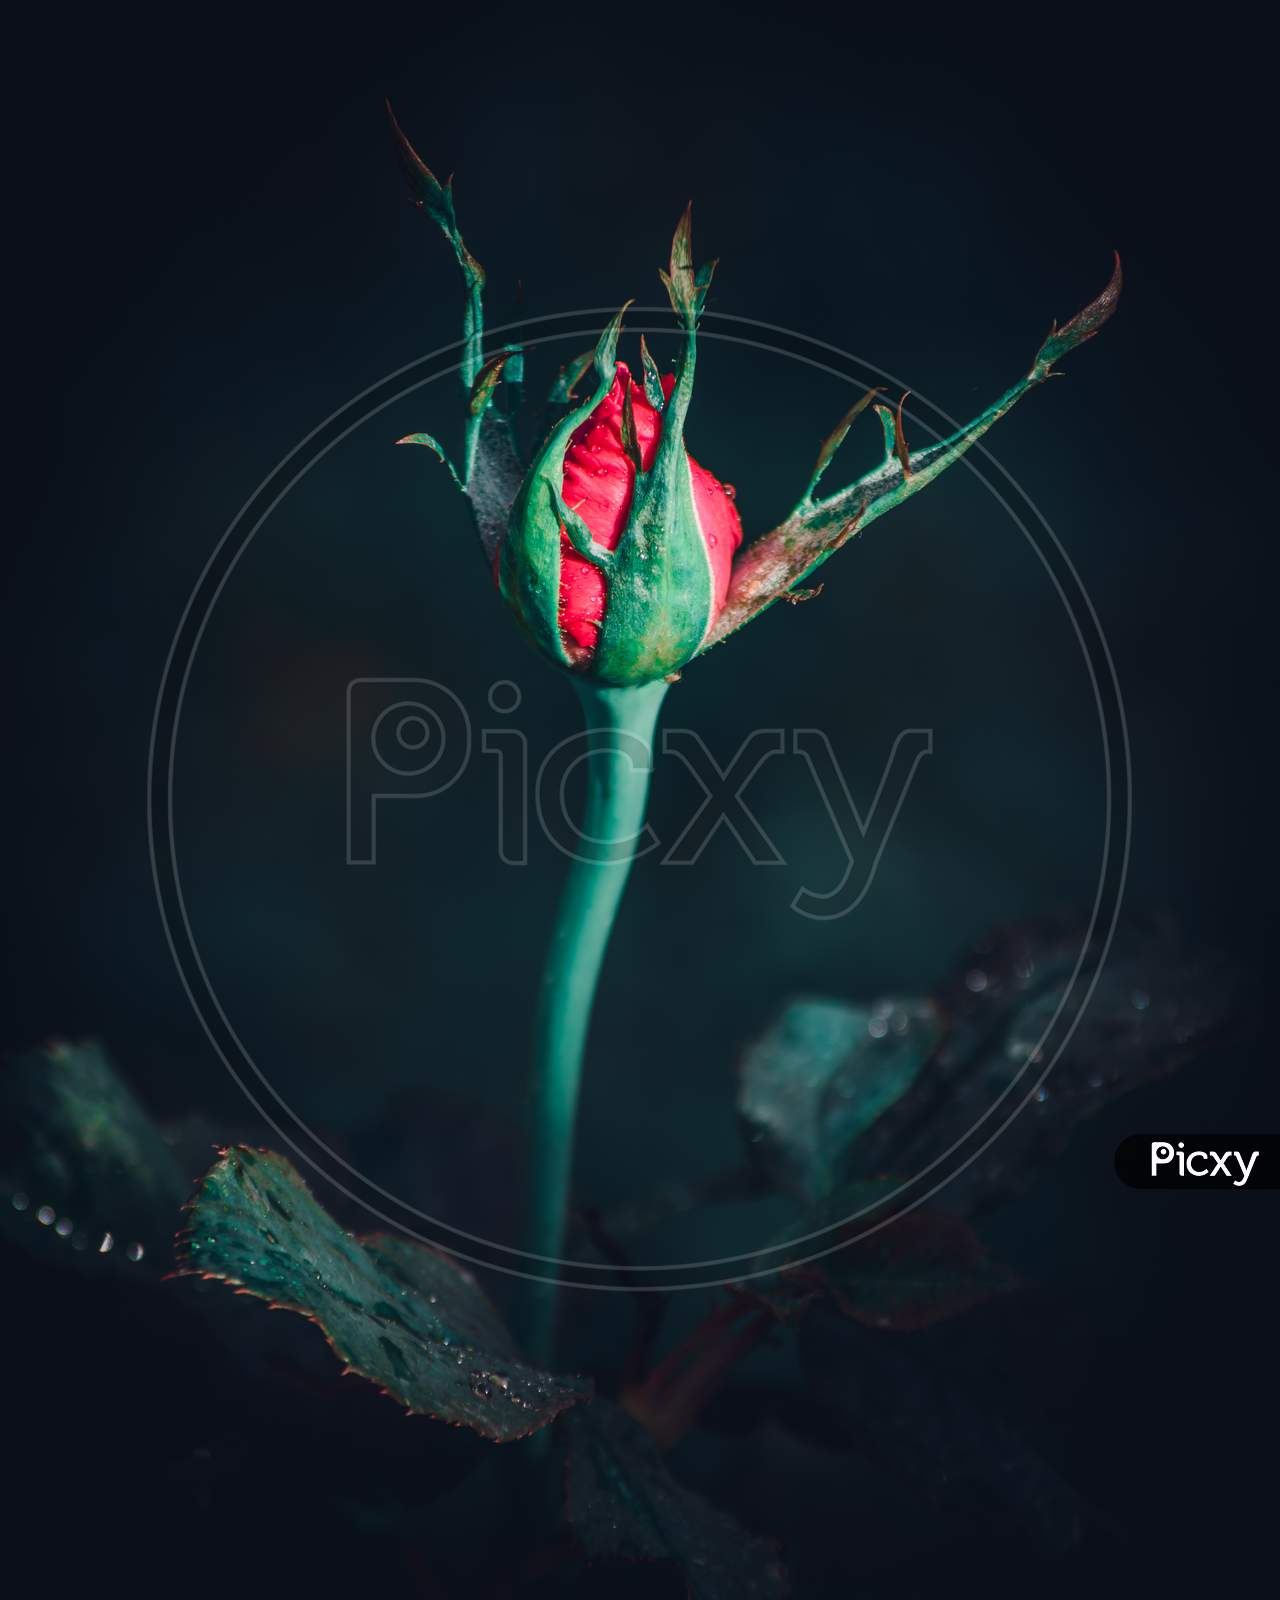 Isolated Single Large Red Rose Flower Bud Surrounded With Green Sepals In The Dark Close Up Photograph. Elegance And The Romance Of The Red Color Concept.